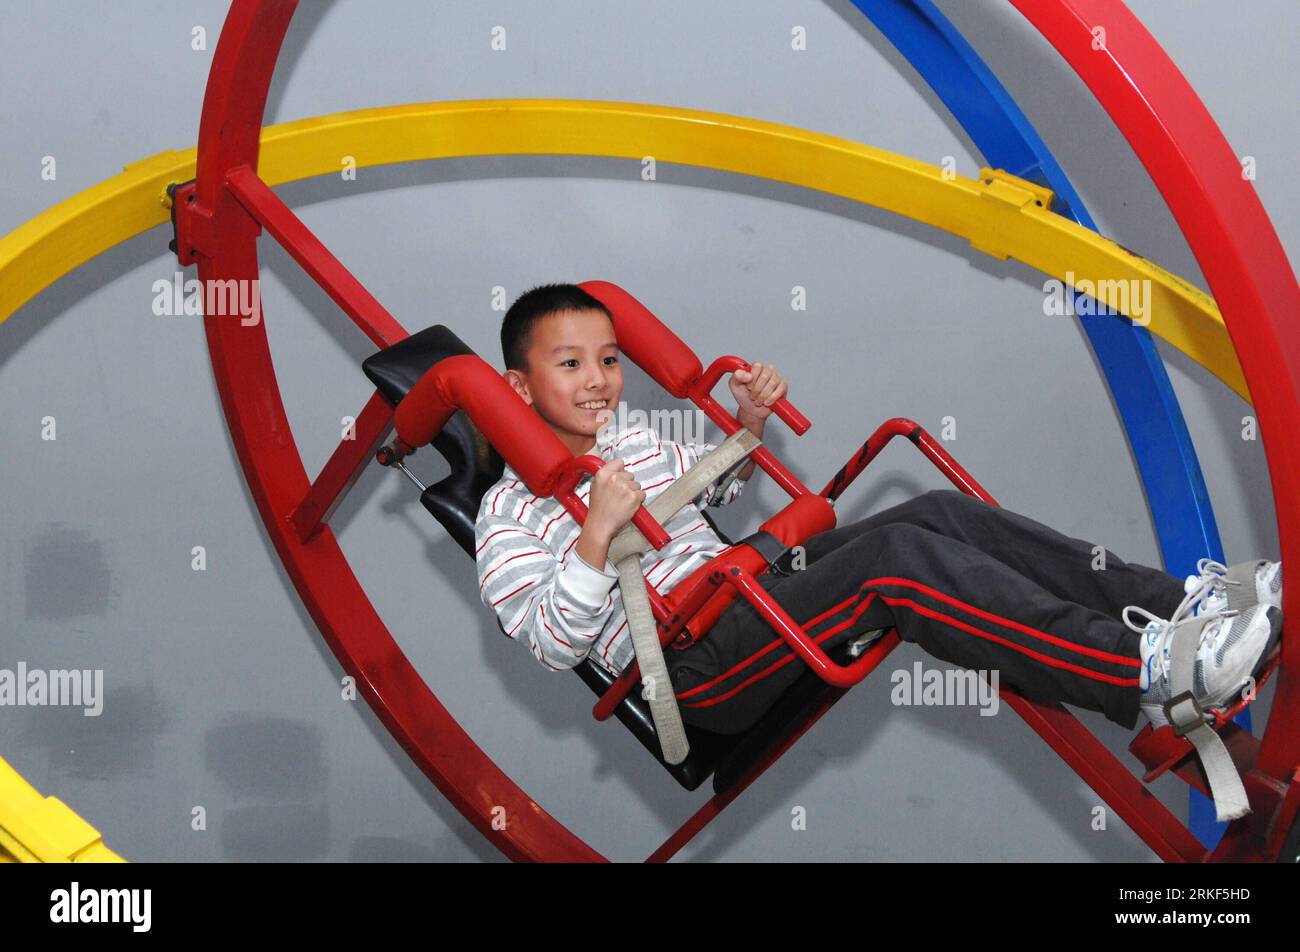 Bildnummer: 55348640  Datum: 15.05.2011  Copyright: imago/Xinhua (110515) -- HANGZHOU, May 15, 2011 (Xinhua) -- A child tries on a brain-function training equipment in Zhejiang Science and Technology Museum in Hangzhou, capital of east China s Zhejiang Province, May 15, 2011. The 2011 Zhejiang Science and Technology Week opened Sunday. Popular science locations in Zhejiang provided free entrance and a series of interactive activities to the public. (Xinhua/Ju Huanzong) (llp) CHINA-ZHEJIANG-SCIENCE WEEK-OPEN (CN) PUBLICATIONxNOTxINxCHN Gesellschaft kbdig xkg 2011 quer o0 Technologiemuseum Kind Stock Photo